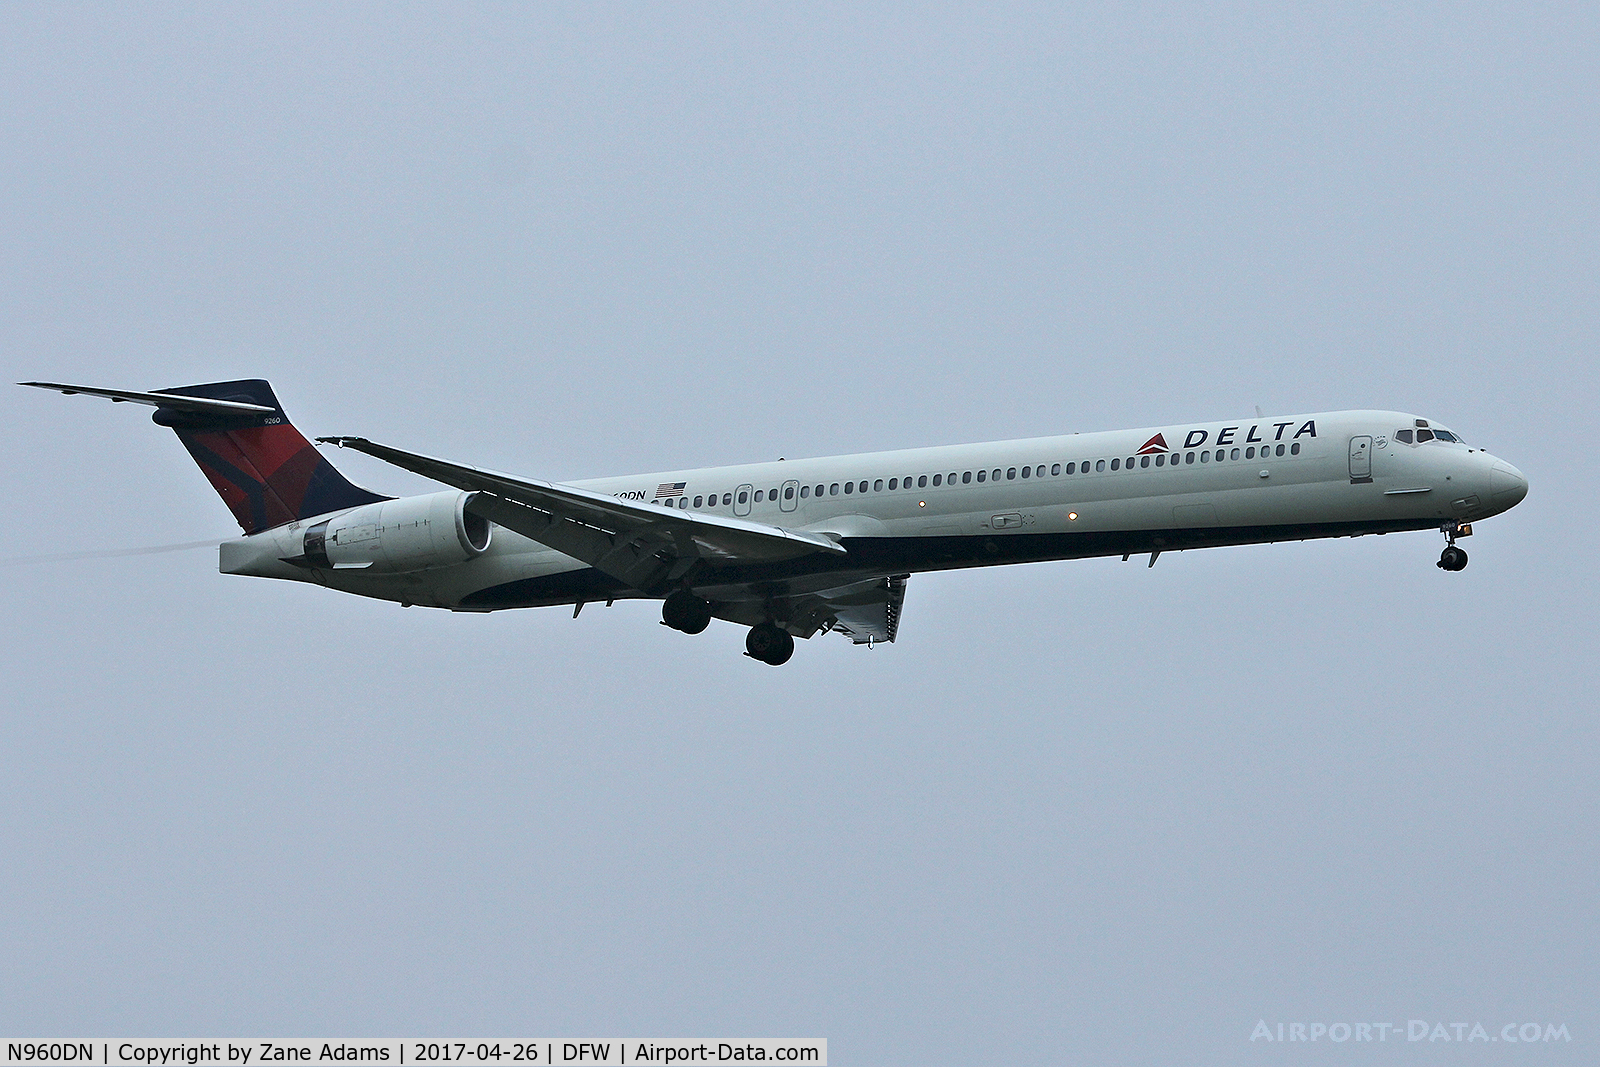 N960DN, 1998 McDonnell Douglas MD-90-30 C/N 53530, Arriving at DFW Airport